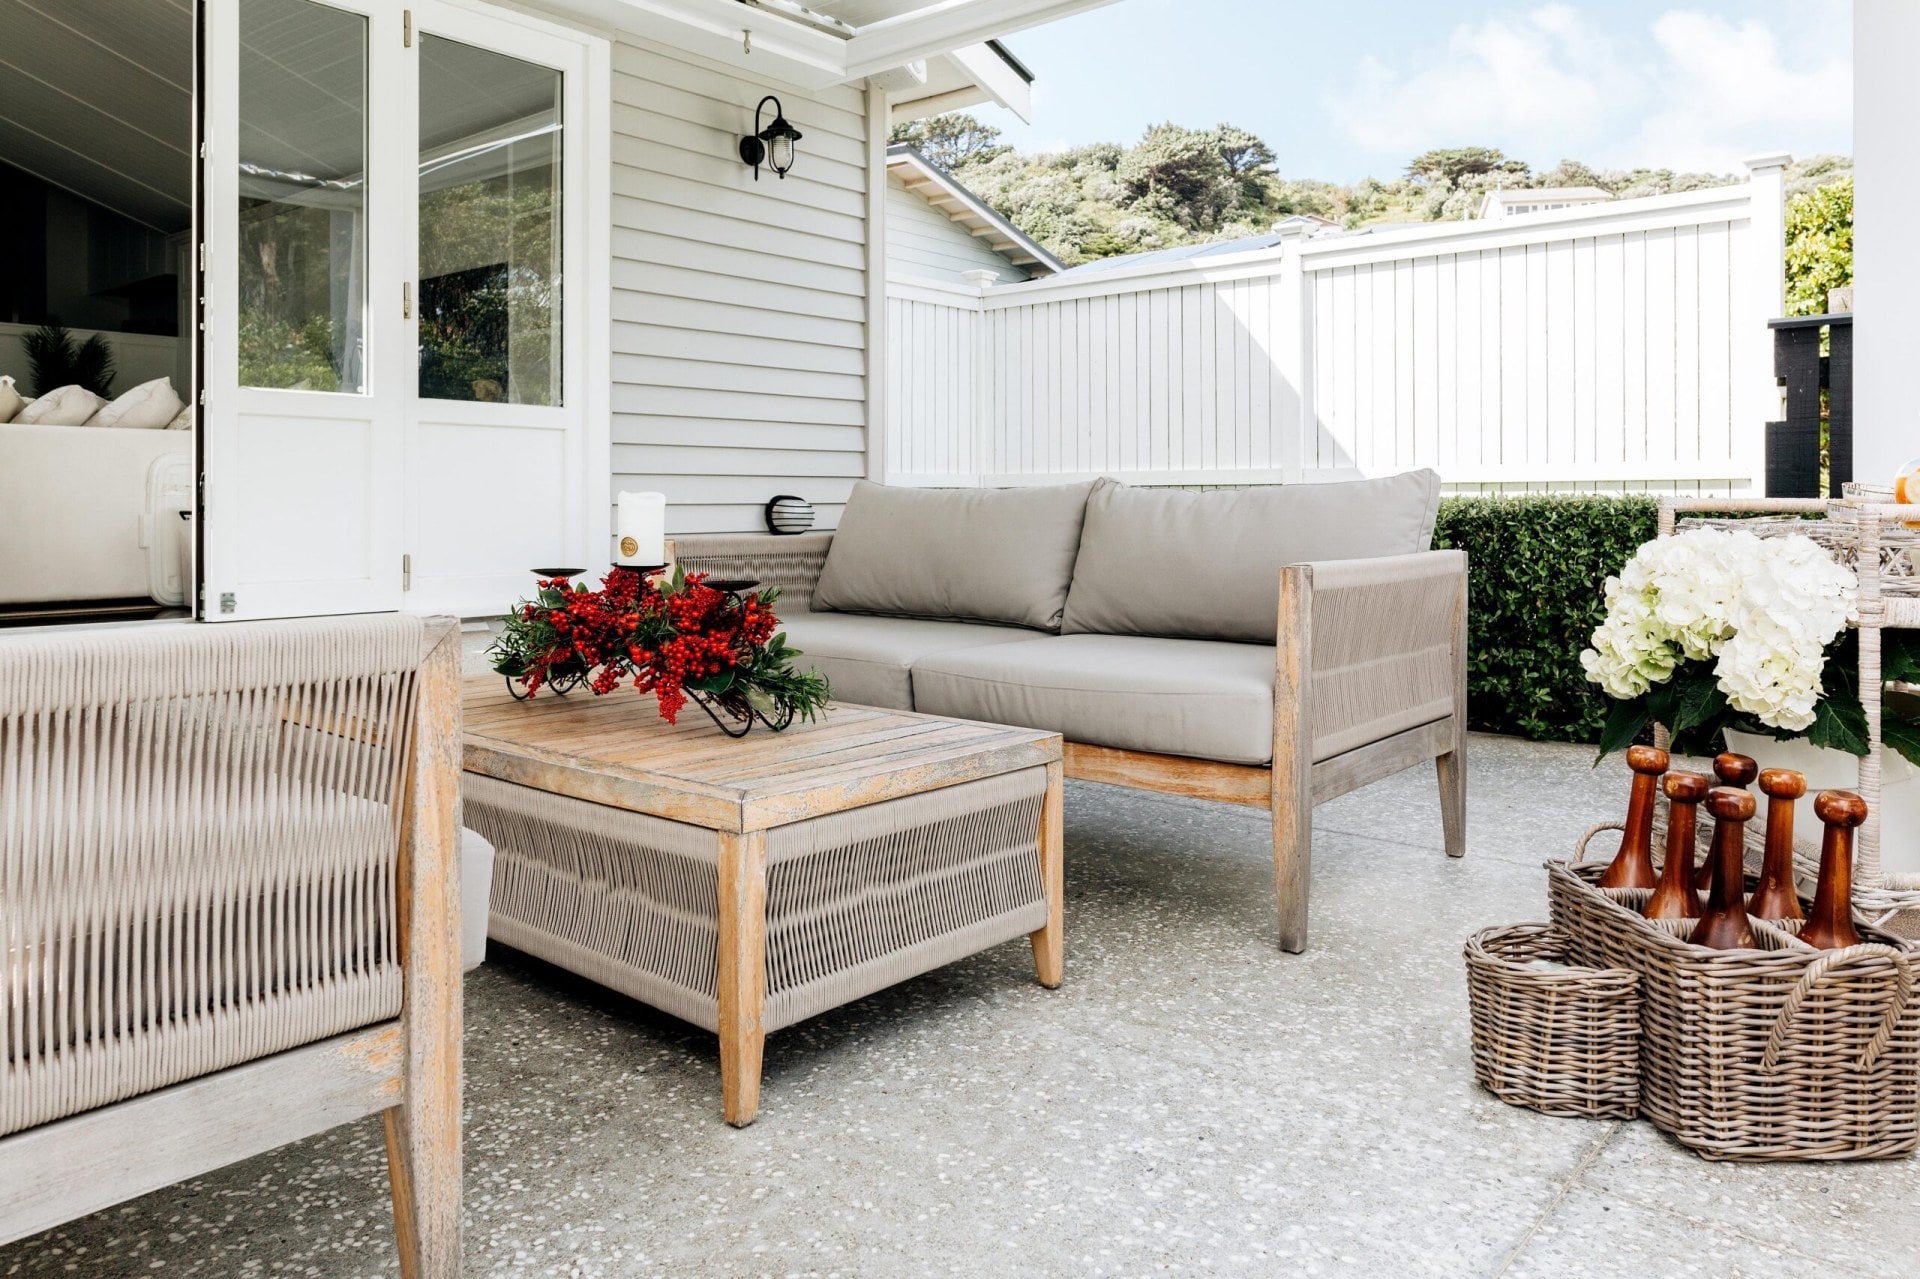 Paved outdoor area with two outdoor and wicker sofas